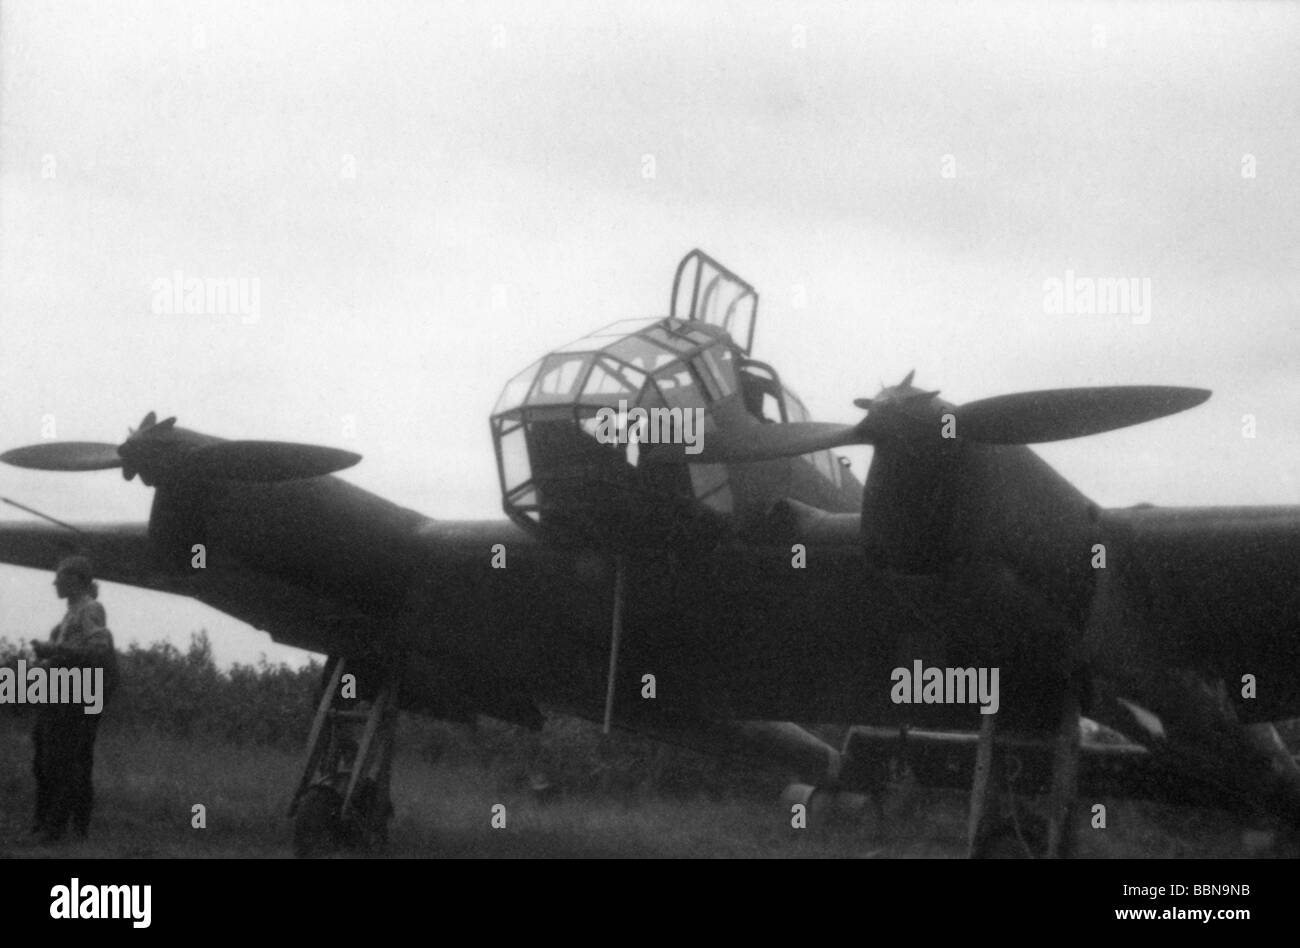 events, Second World War / WWII, aerial warfare, aircraft, German close reconnaissance aircraft Focke-Wulf 189 'Uhu', Eastern Front, mid July 1941, Stock Photo